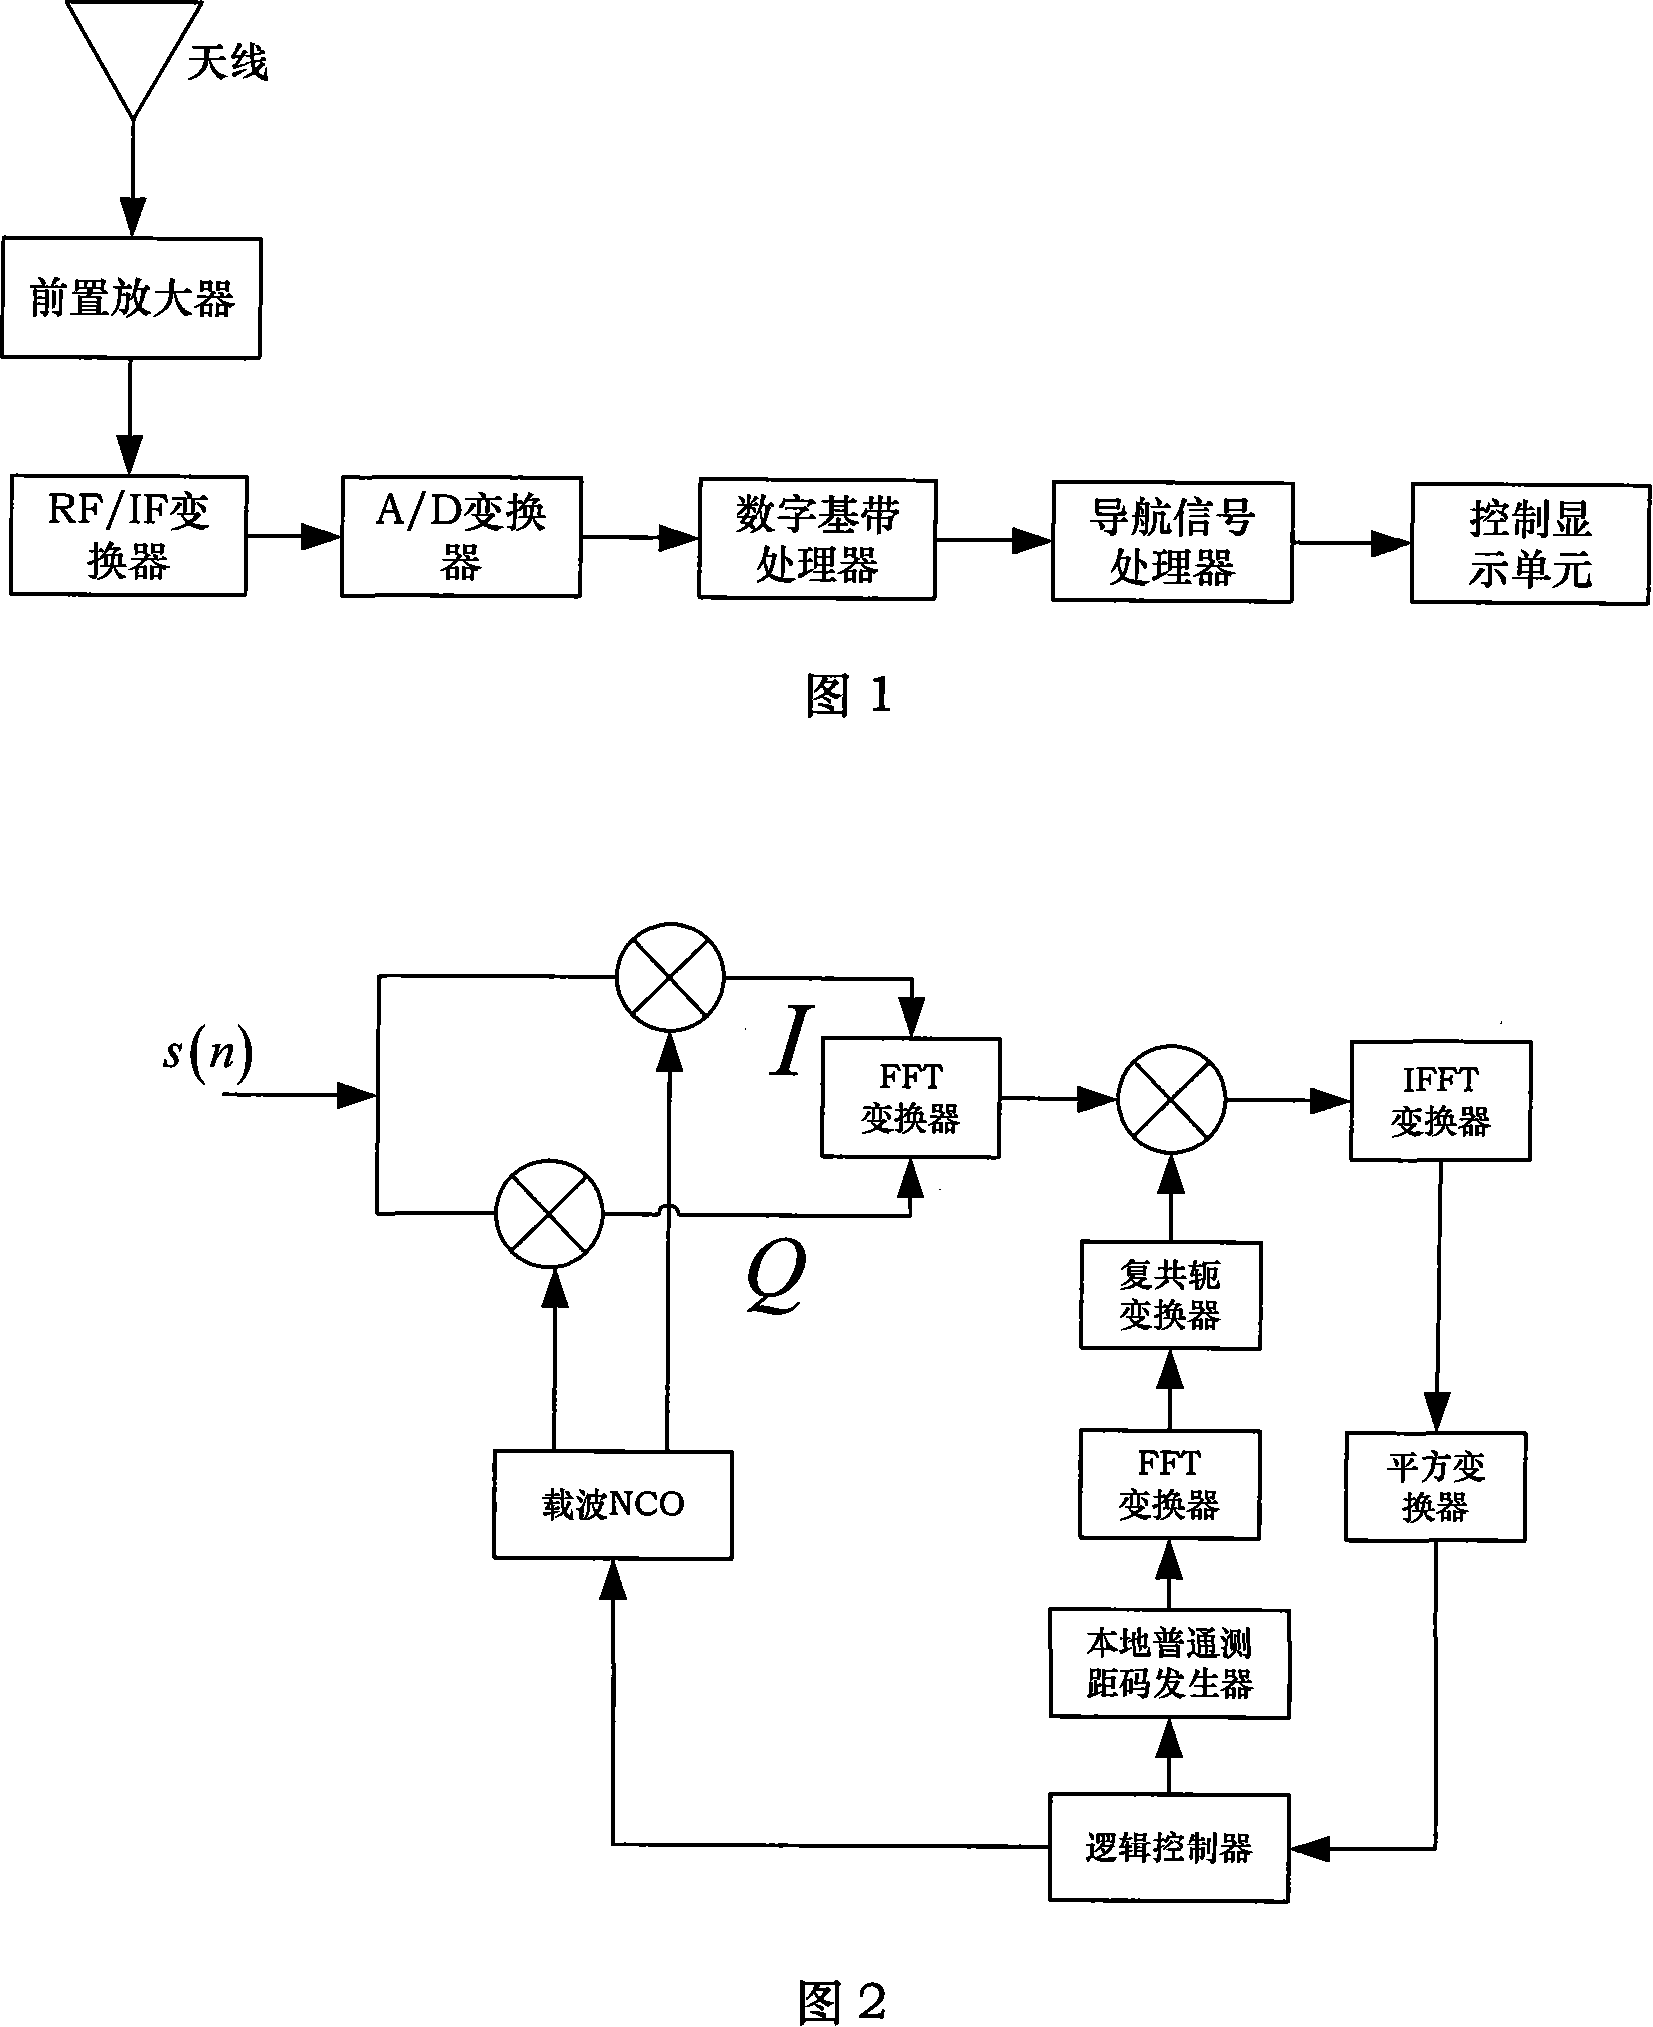 Baseband signal processing method for GNSS receiver